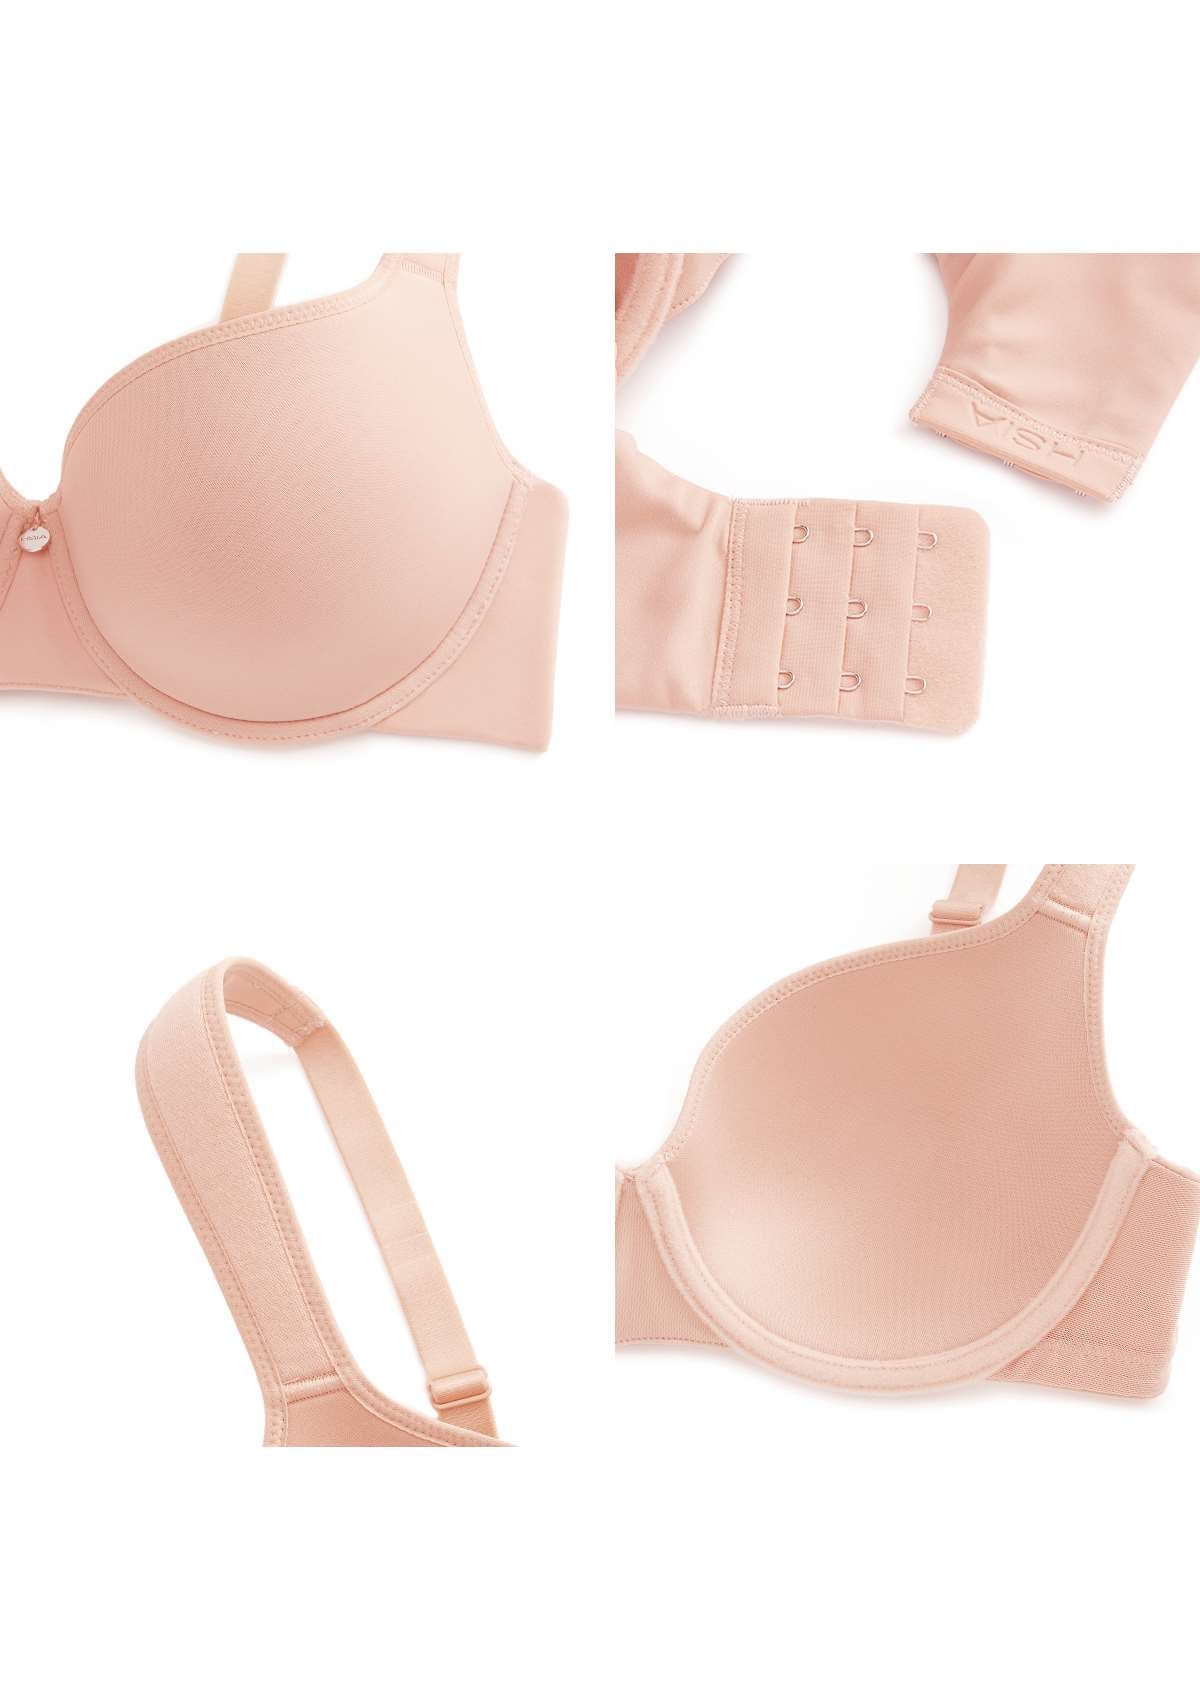 HSIA Patricia Smooth Classic T-shirt Lightly Padded Minimizer Bra - Light Pink / 42 / H